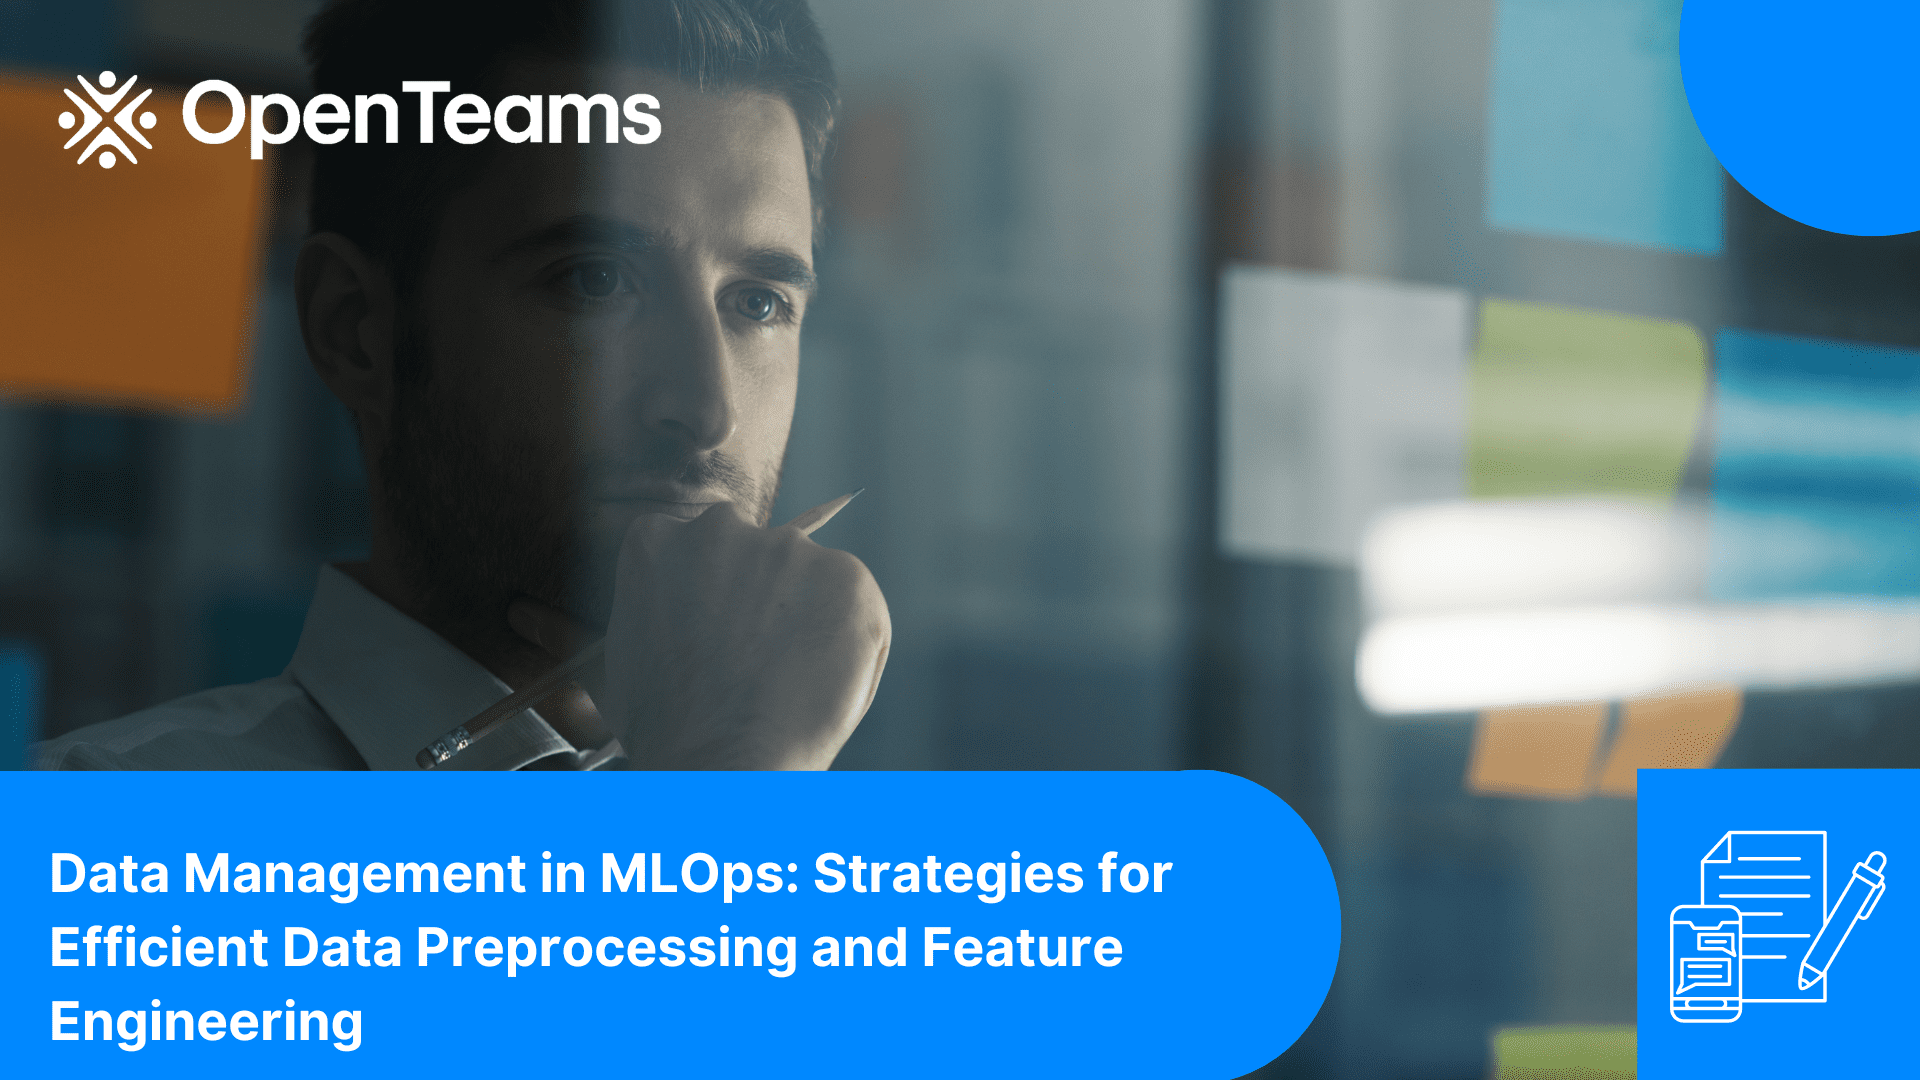 Data Management in MLOps: Strategies for Efficient Data Preprocessing and Feature Engineering